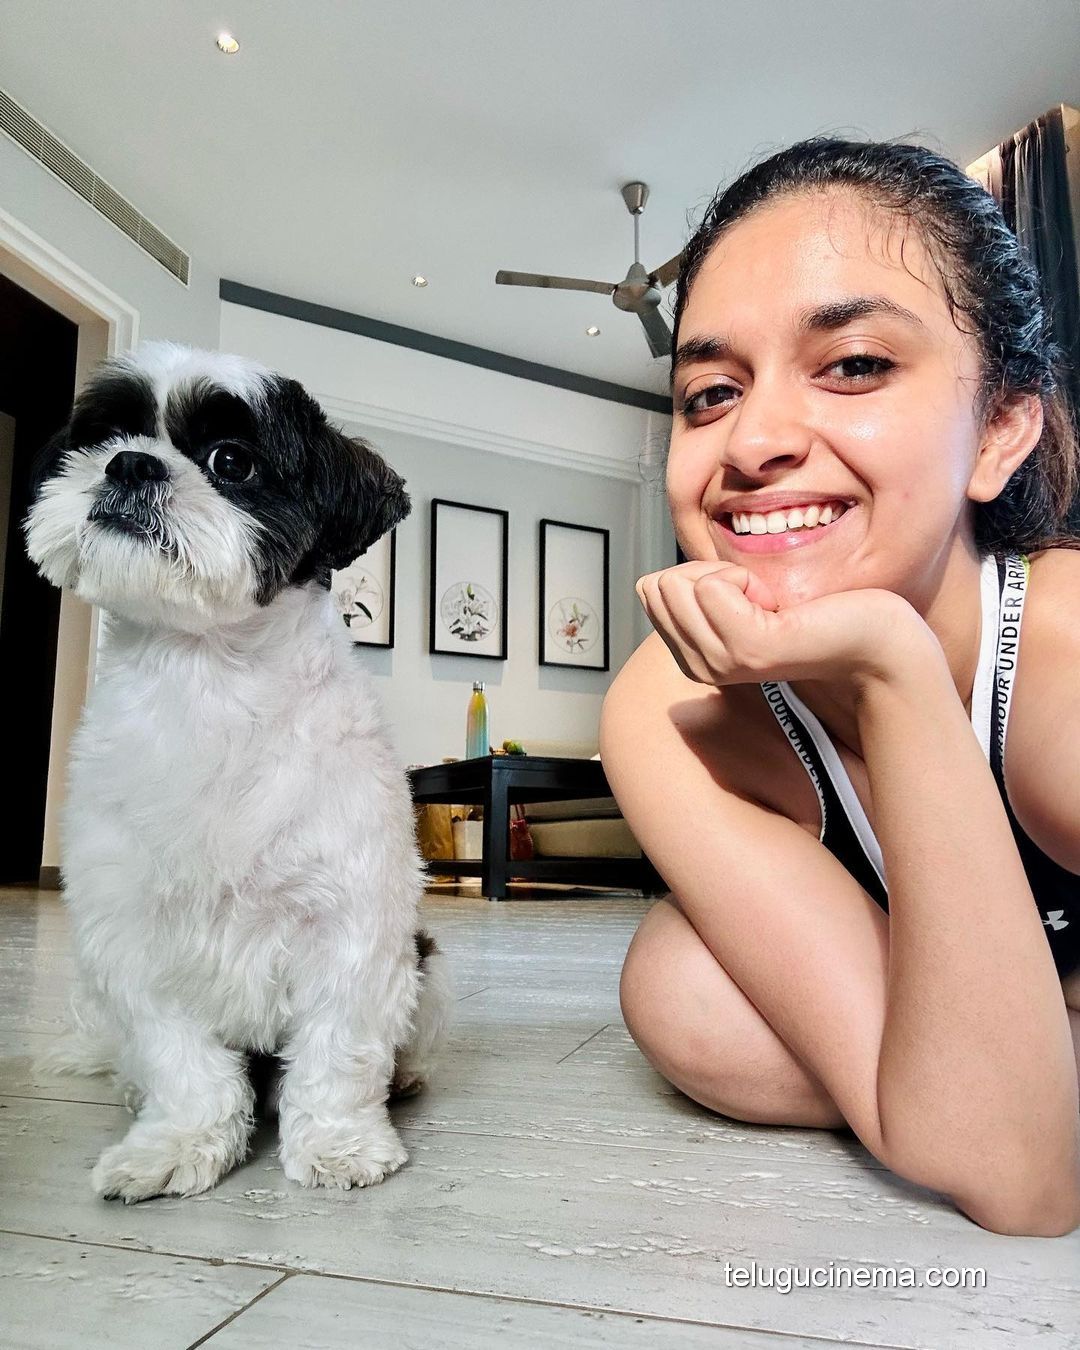 Keerthy Suresh playing with her pet dog